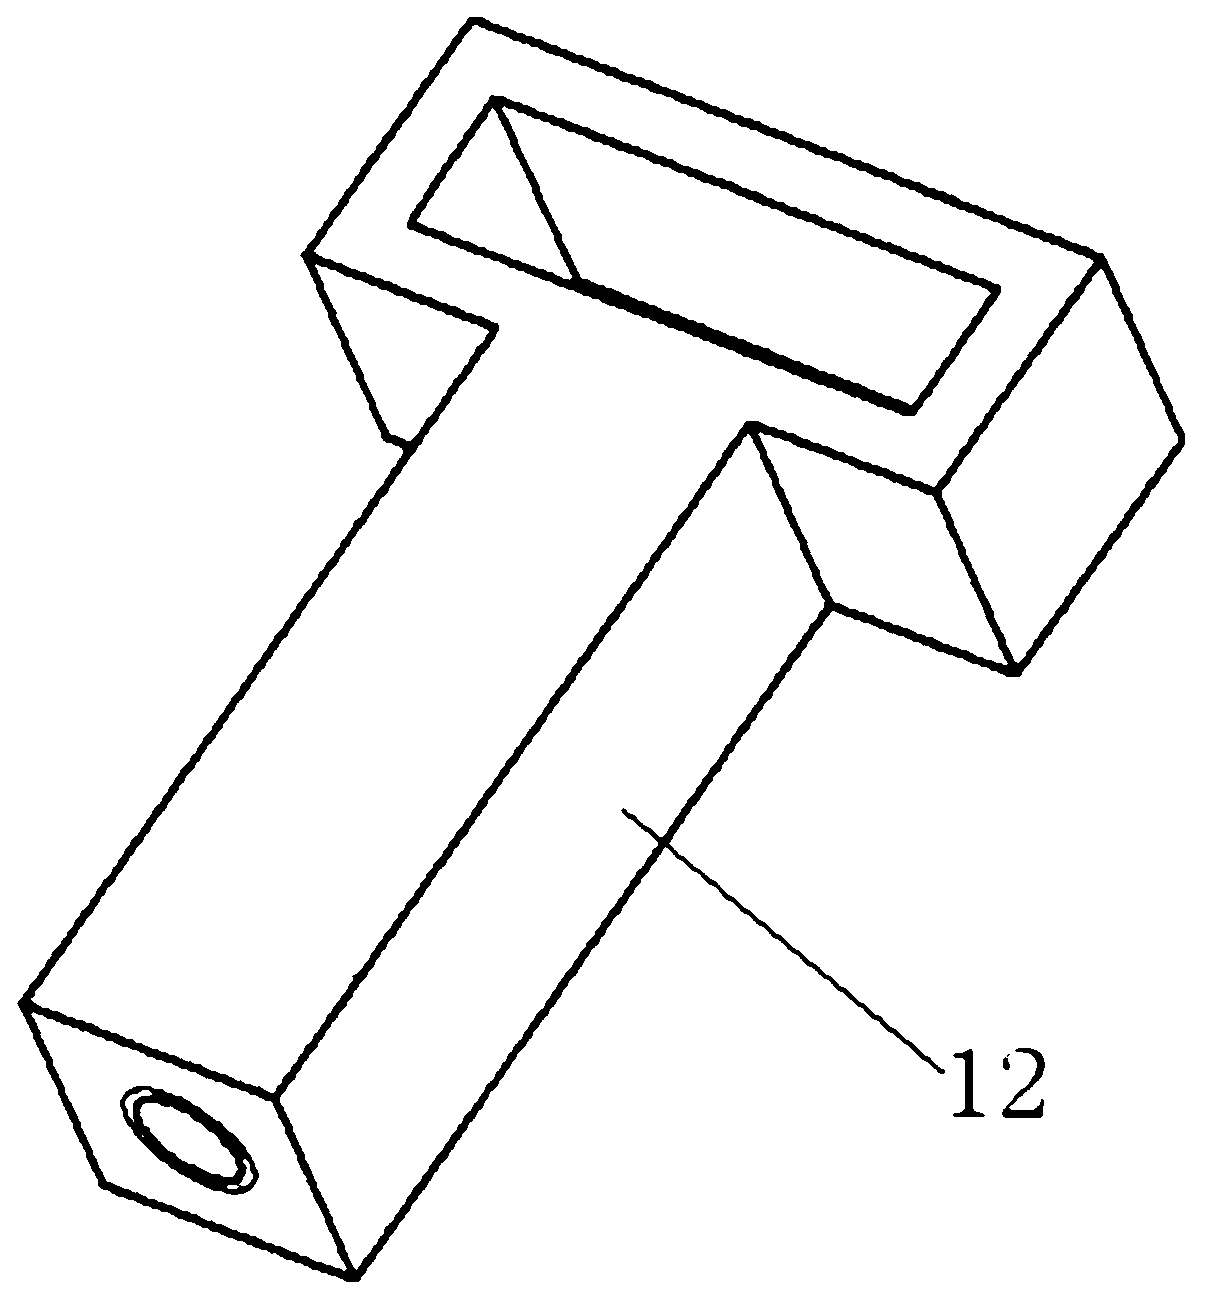 Fully-automatic cleaning device and method for spinneret plate micro-holes